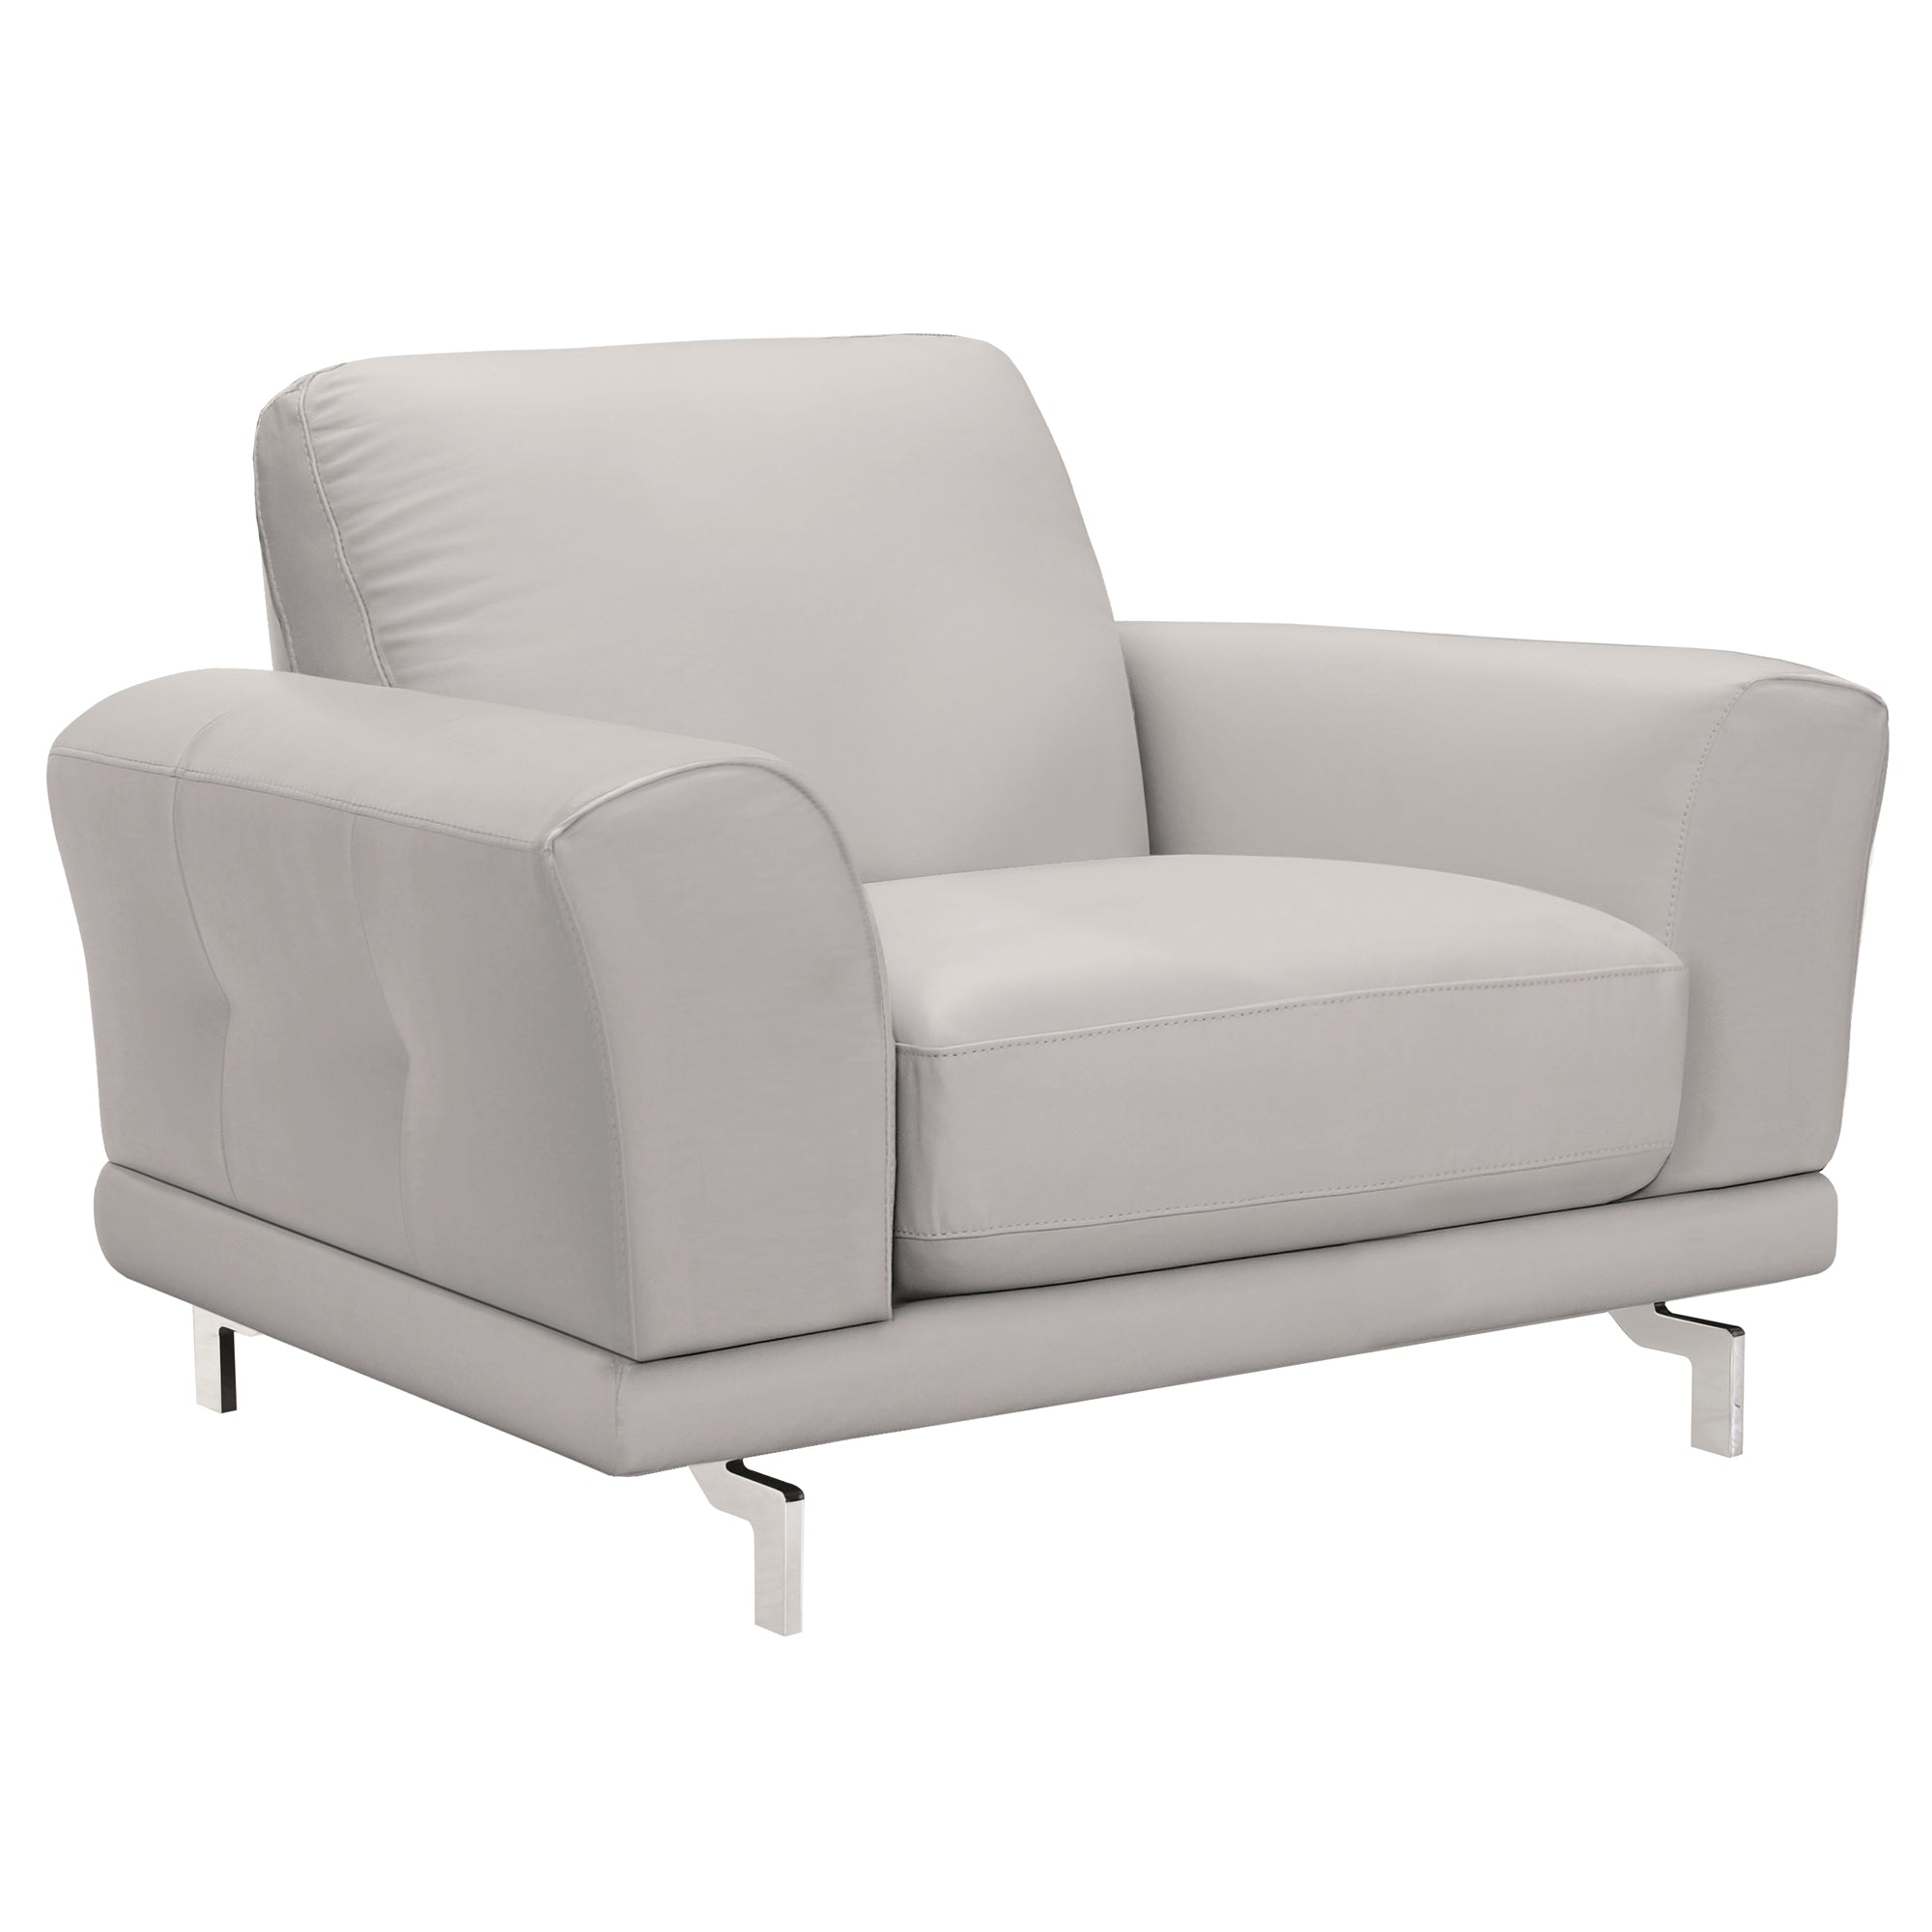 Armen Living Lcev1gr Everly Contemporary Chair In Genuine Dove Grey Leather With Brushed Stainless Steel Legs